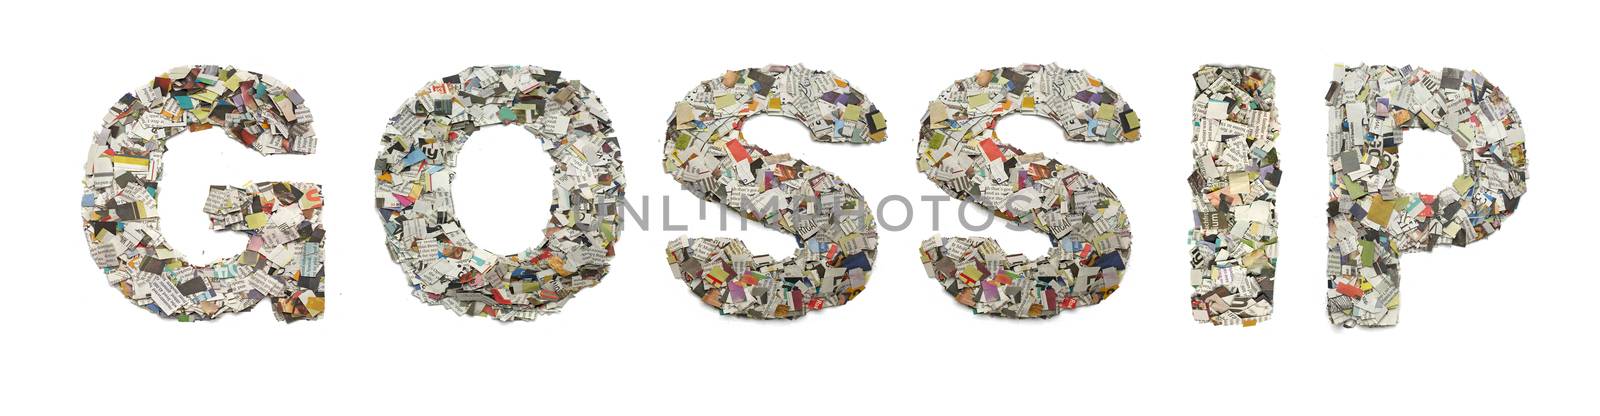 the word  GOSSIP made from newspaper confetti isolated on white